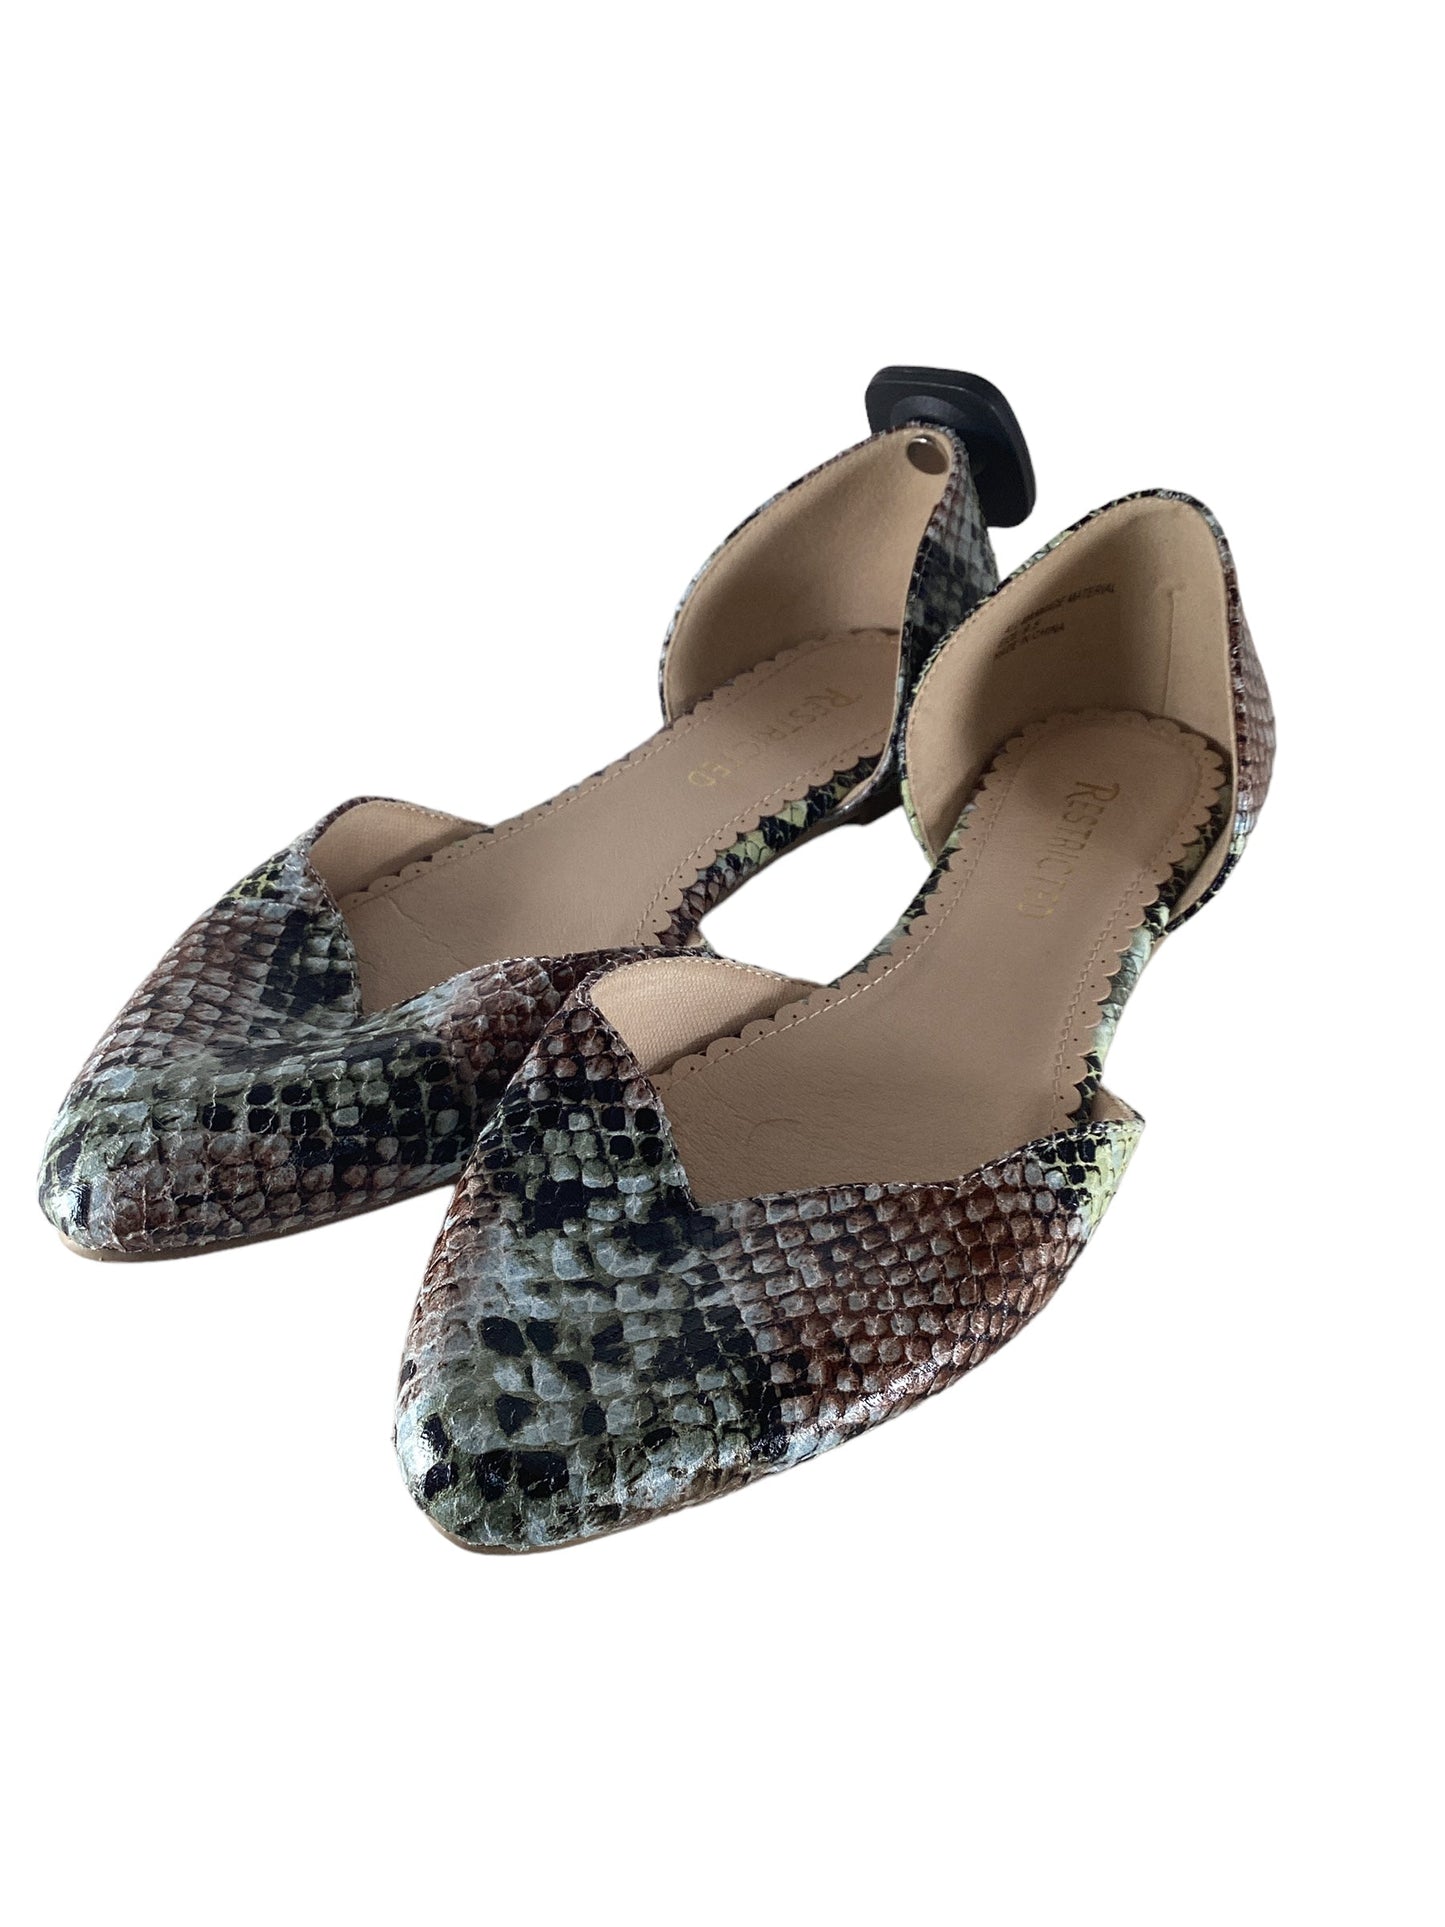 Snakeskin Print Shoes Flats Restricted, Size 9.5